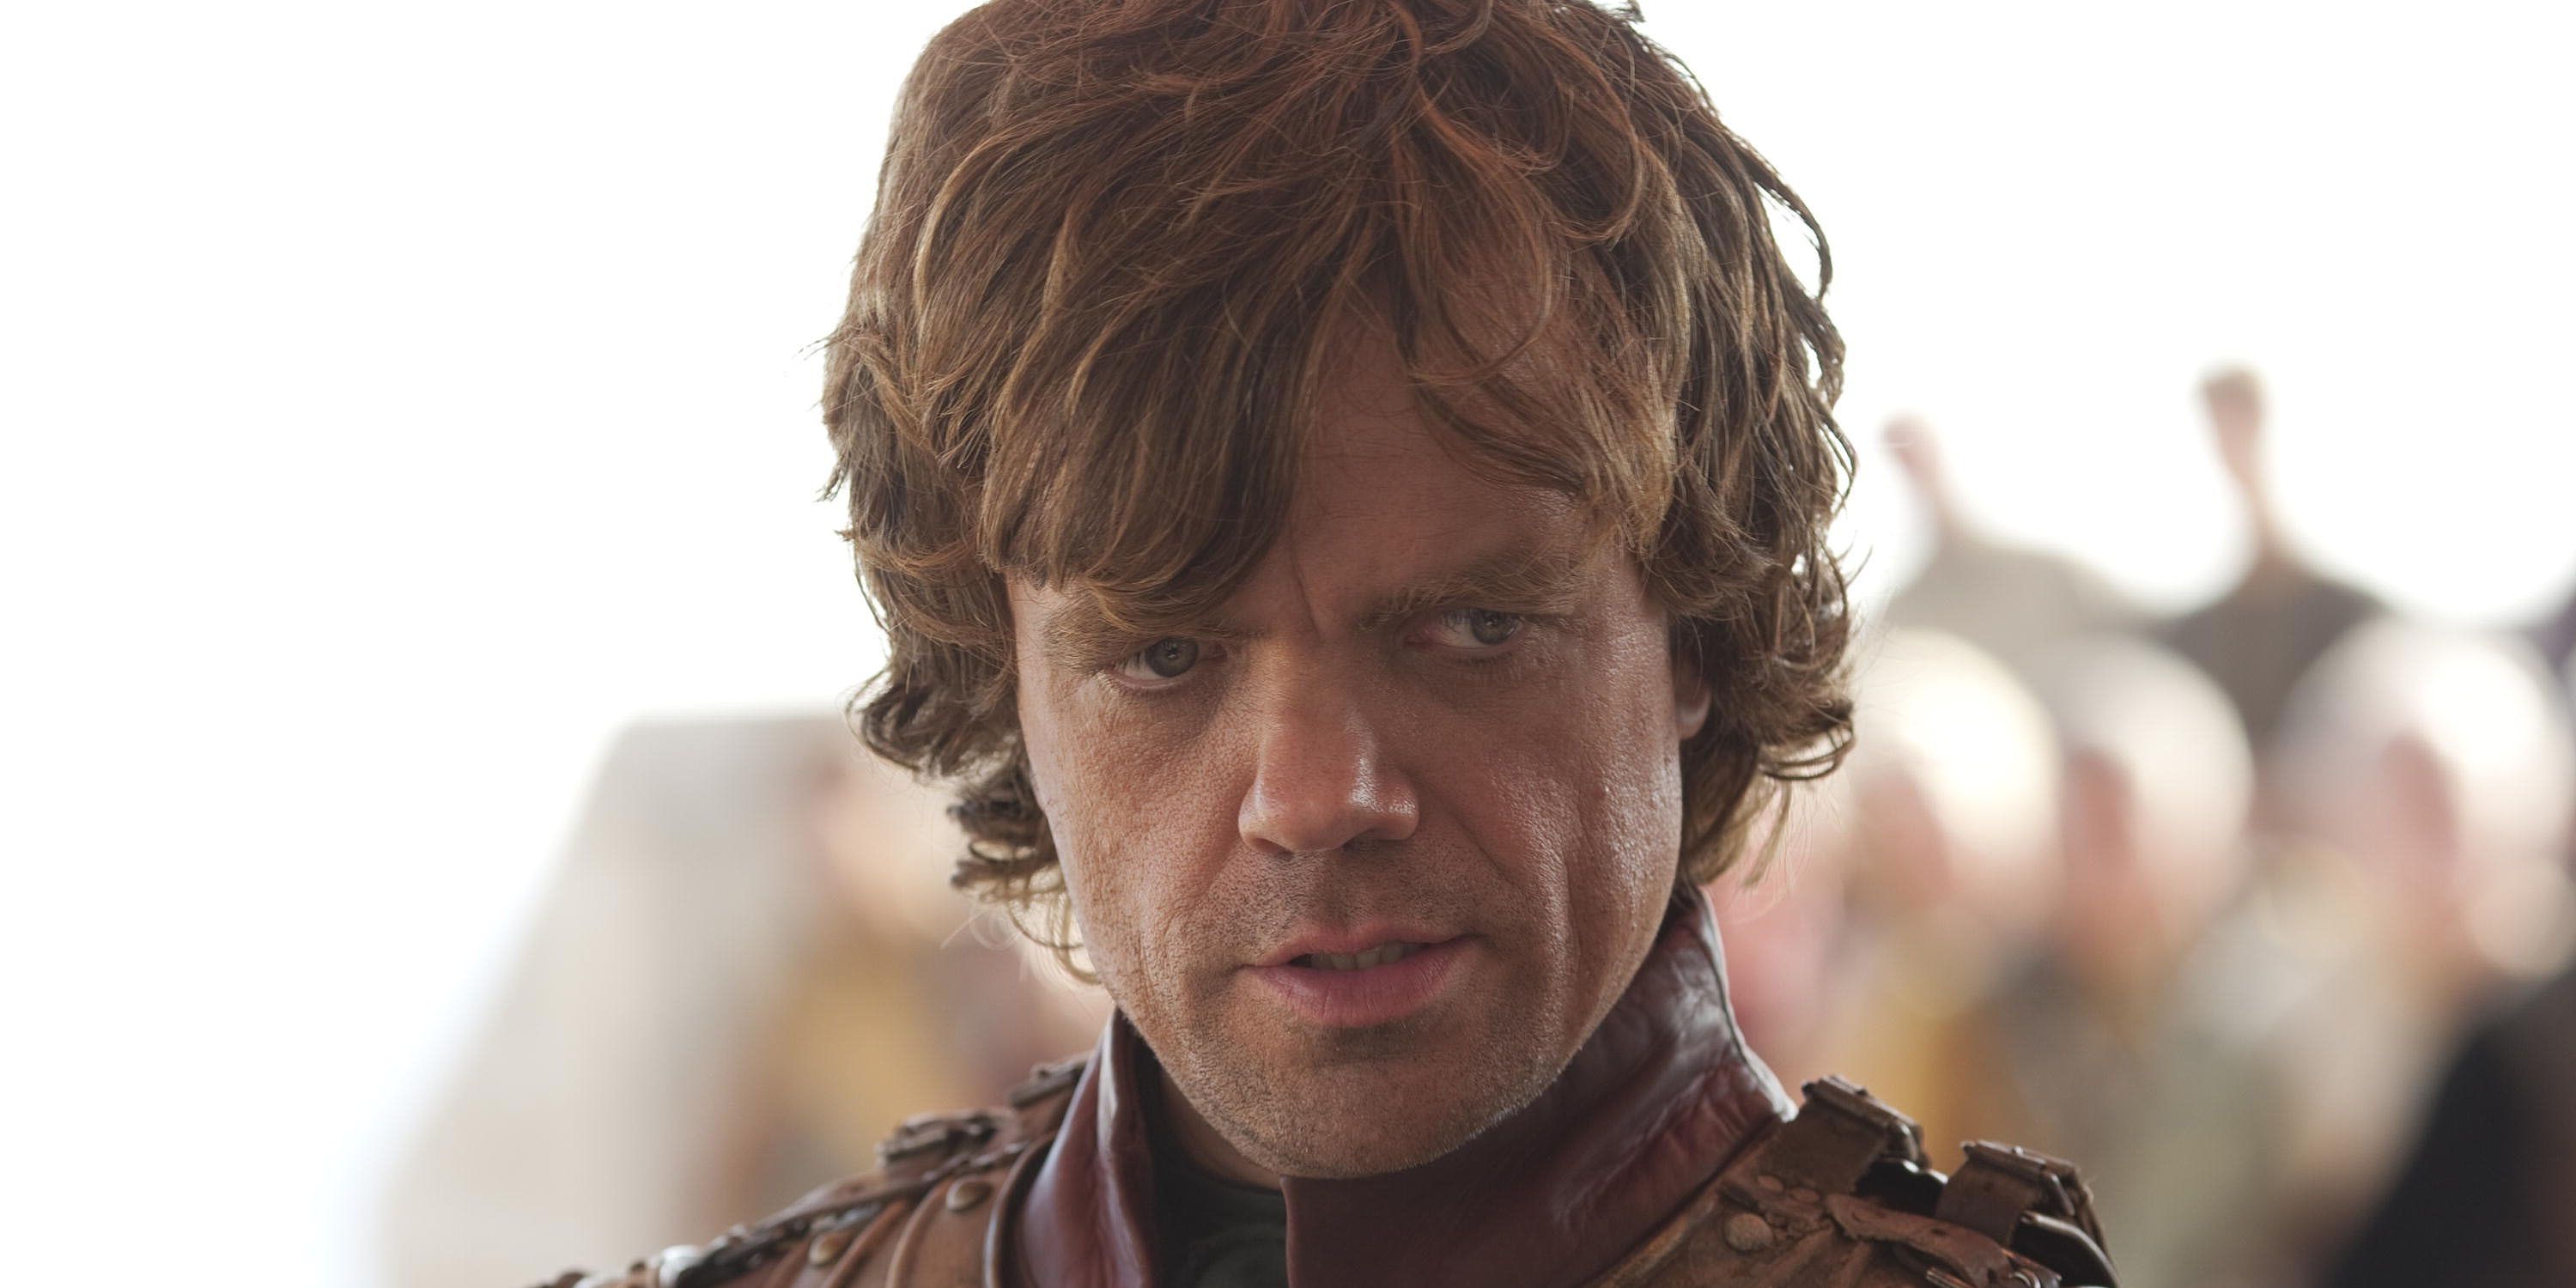 Peter Dinklage as Tyrion Lannister on Game of Thrones